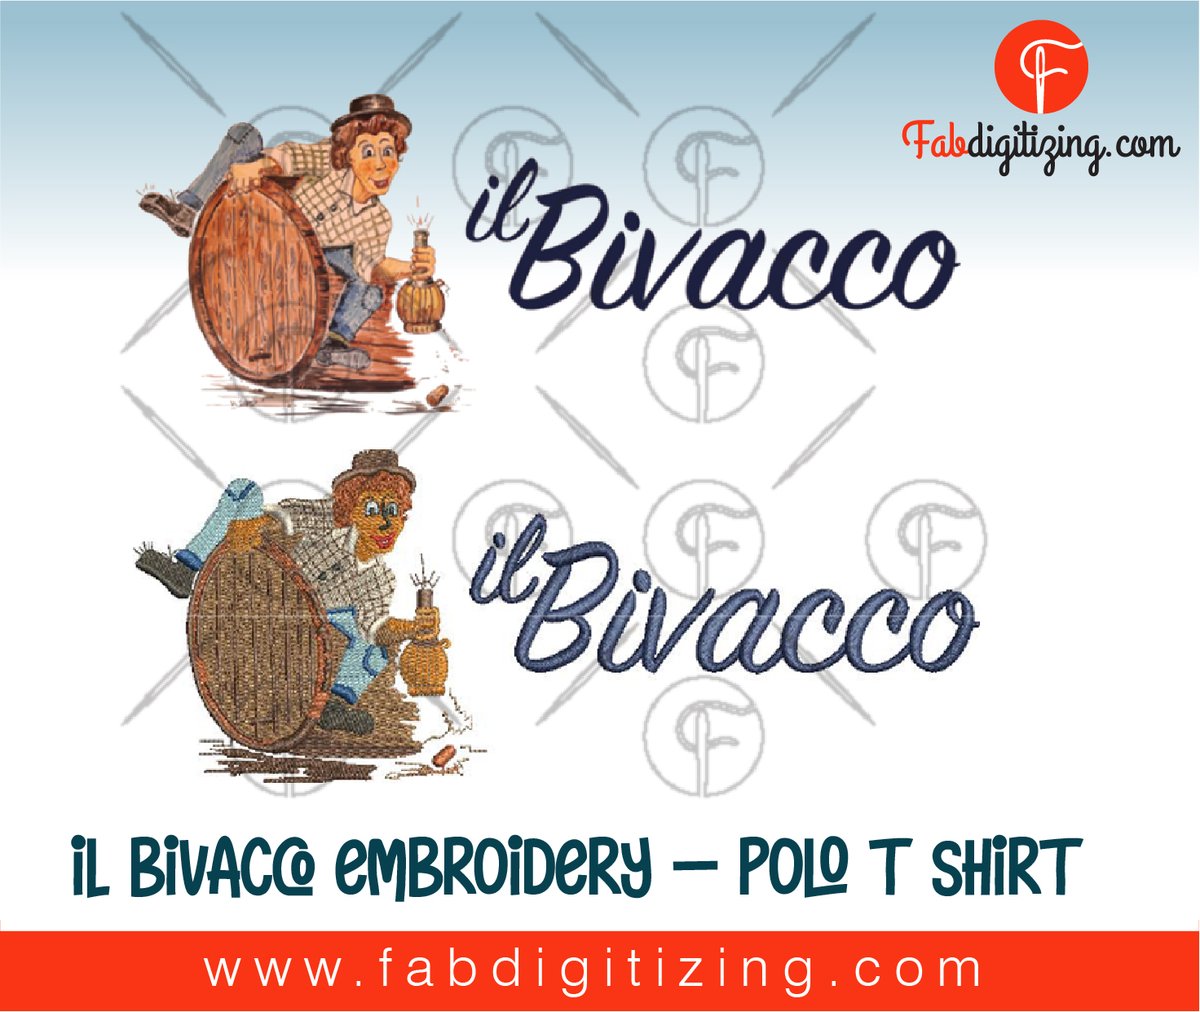 Il bivacco Embroidery - Polo t shirt
#CustomEmbroidery #EmbroideryArt #StitchingLove #PersonalizedEmbroidery #ThreadMagic #EmbroideryDesigns #NeedleAndThread #HandmadeEmbroidery #CustomStitching #EmbroideryHoops #CraftyHands #EmbroideryAddict #UniqueStitches #ThreadCraft